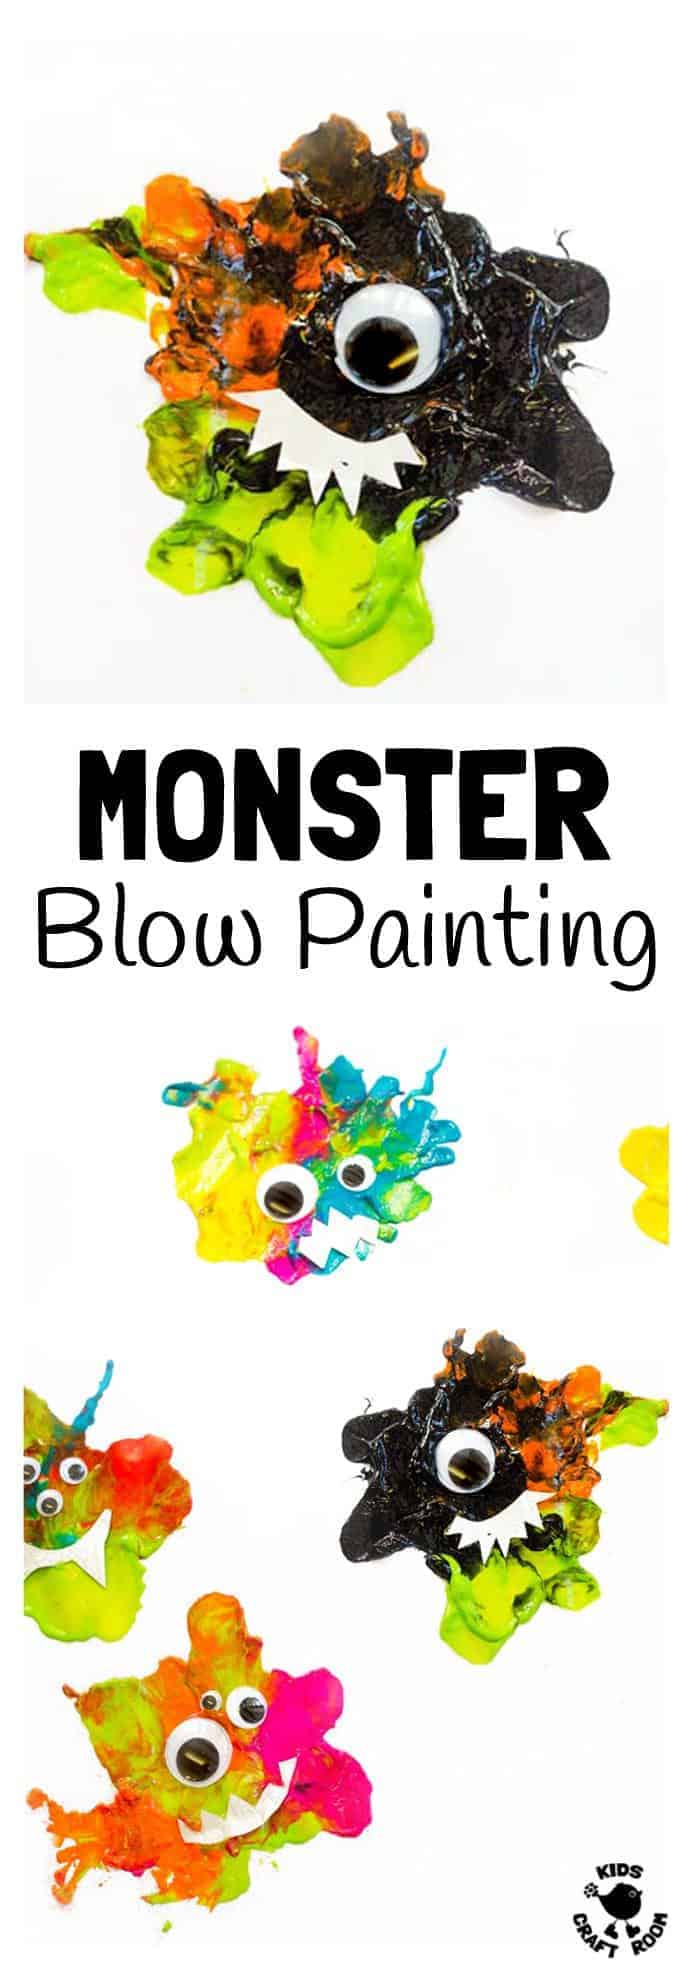 MONSTER BLOW PAINTING - Kids will love blow painting their own unique MONSTER CRAFT. Stick them on a greeting card, display them on the wall or even turn them into puppets to play with. A fun Halloween craft or monster craft all year round. Perfect for your little monsters!